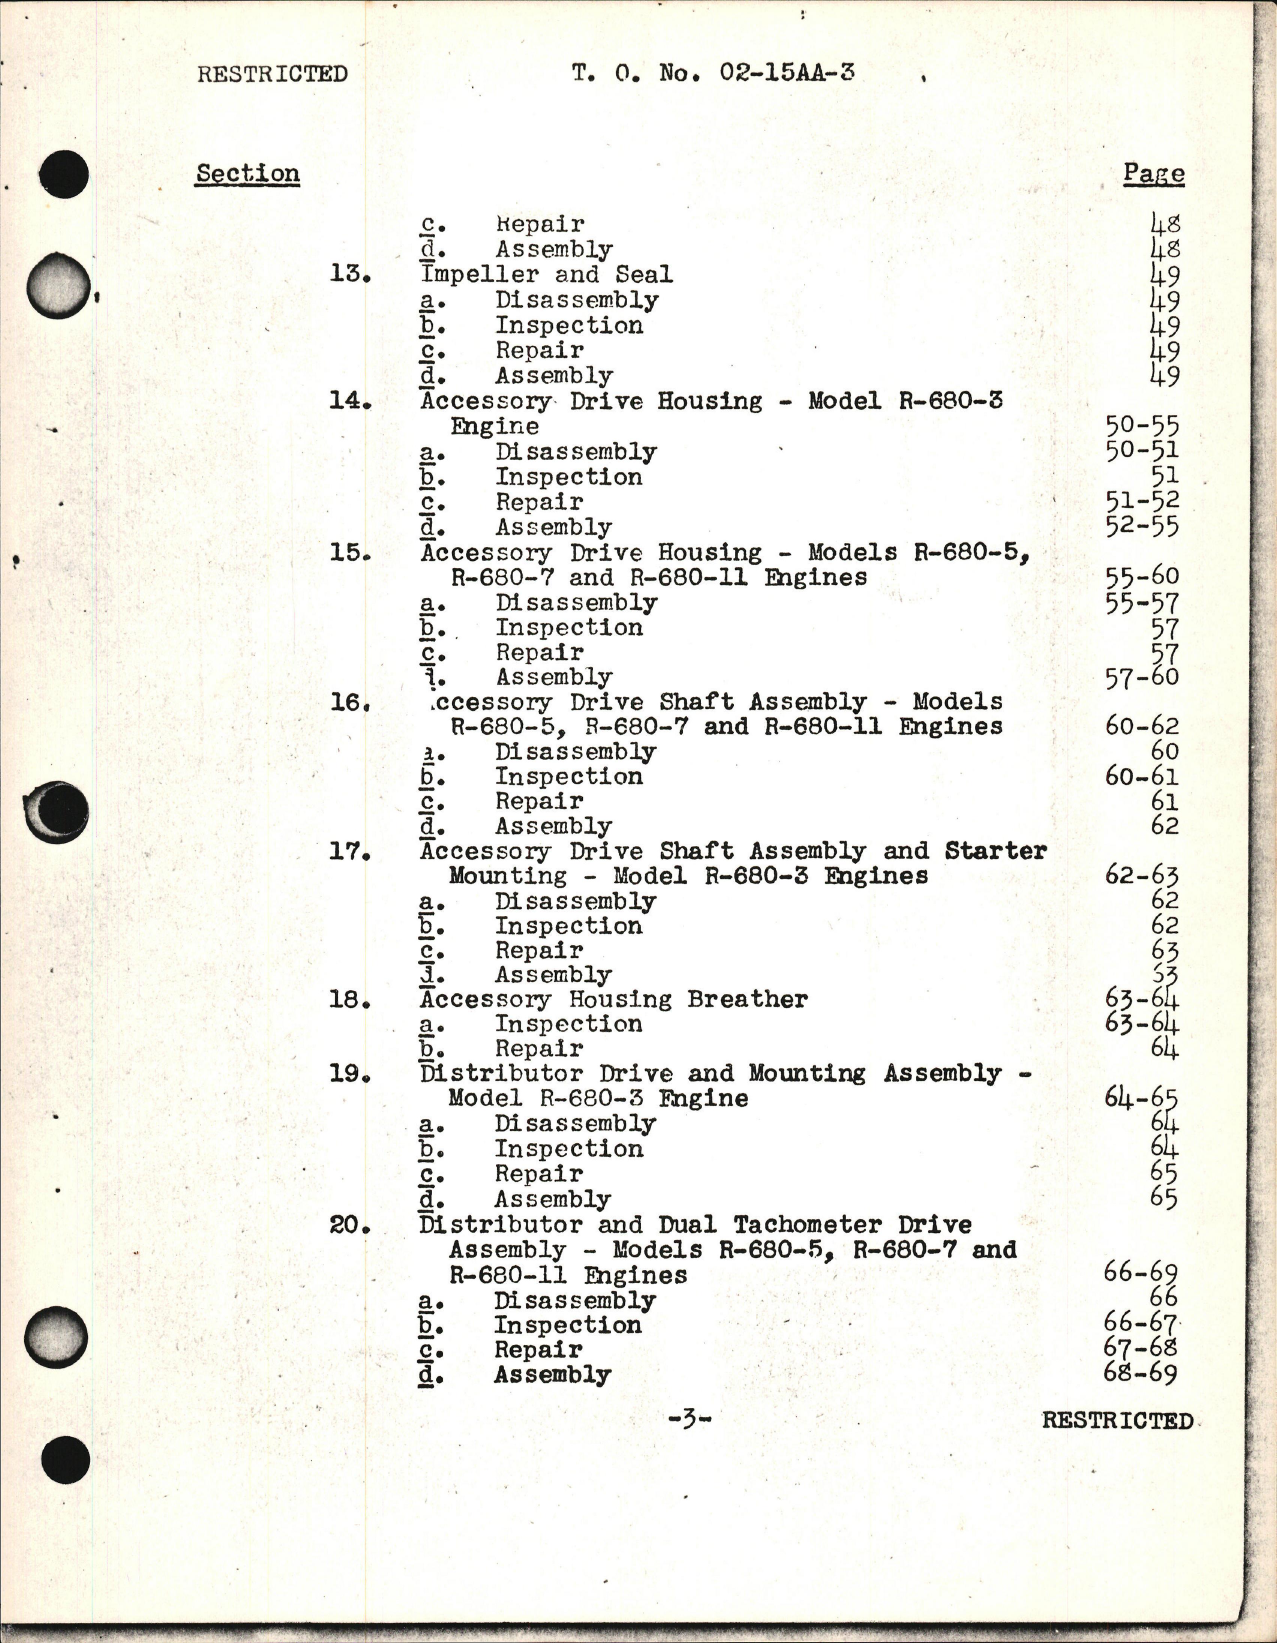 Sample page 7 from AirCorps Library document: Overhaul Instructions for R-680-3, -5, -7, and -11 Engines